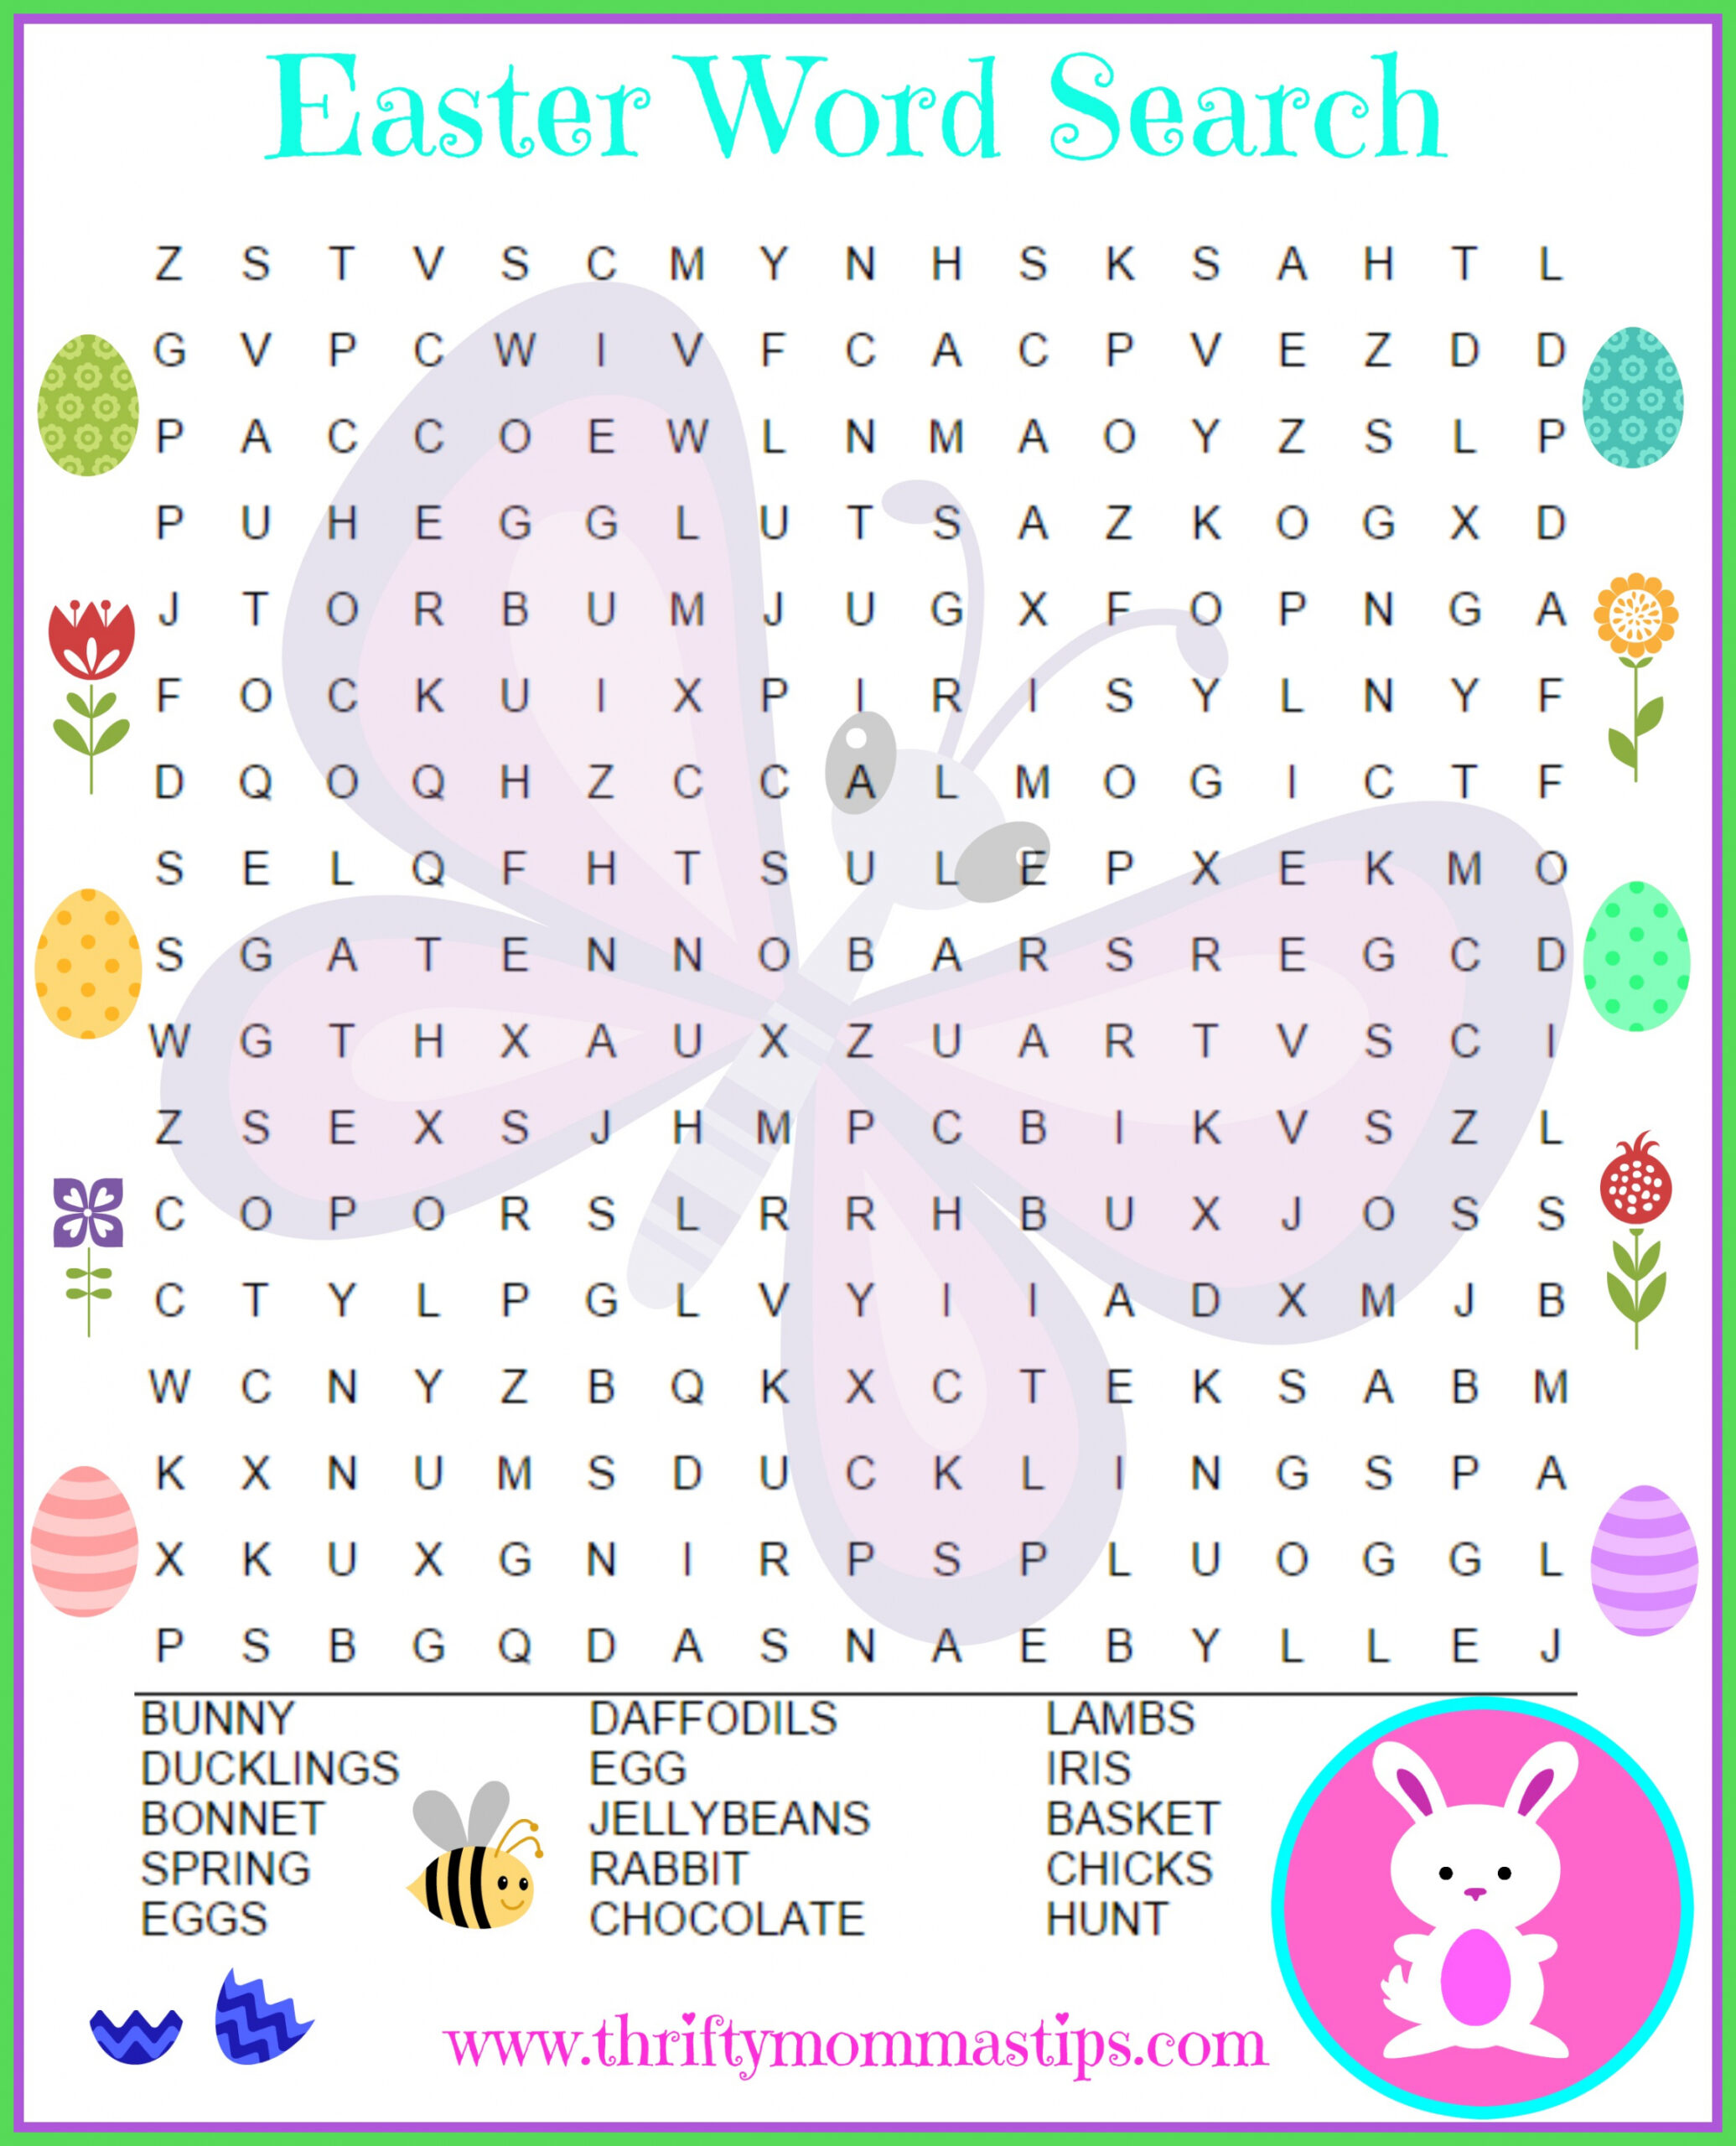 Easter Word Search Free Printable — Thrifty Mommas Tips - FREE Printables - Free Printable Easter Word Search